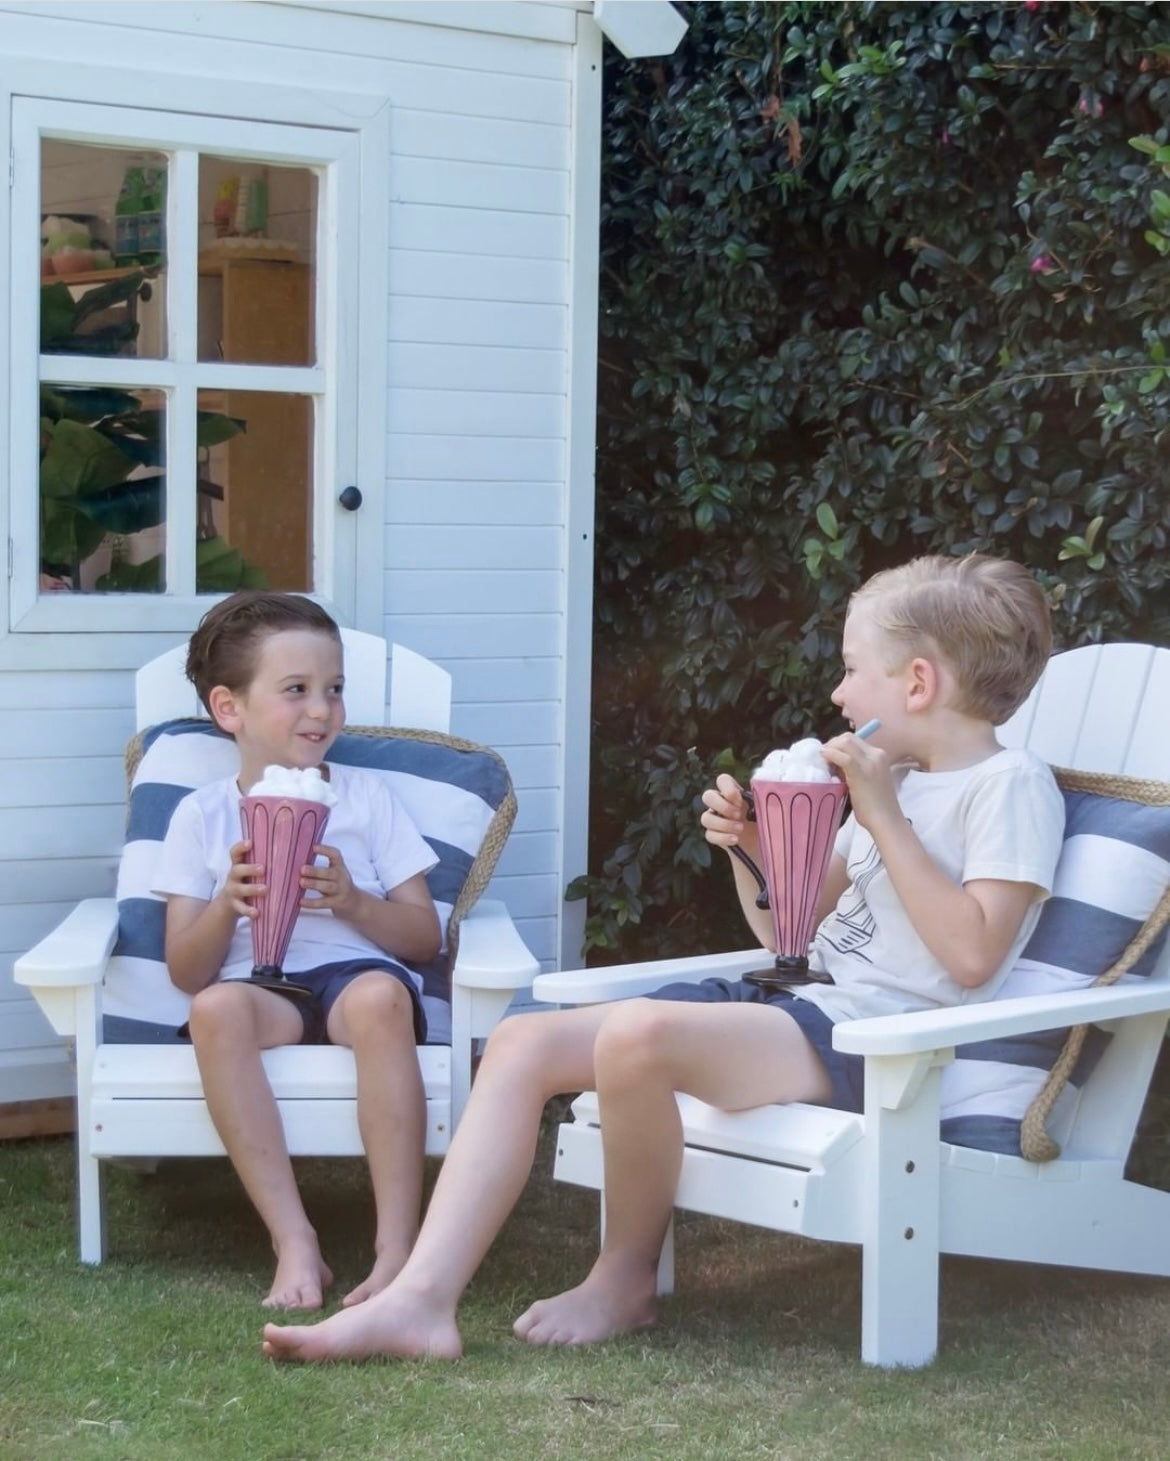 Two boys sitting outside in the garden sipping milkshakes on white children's Adirondack chairs